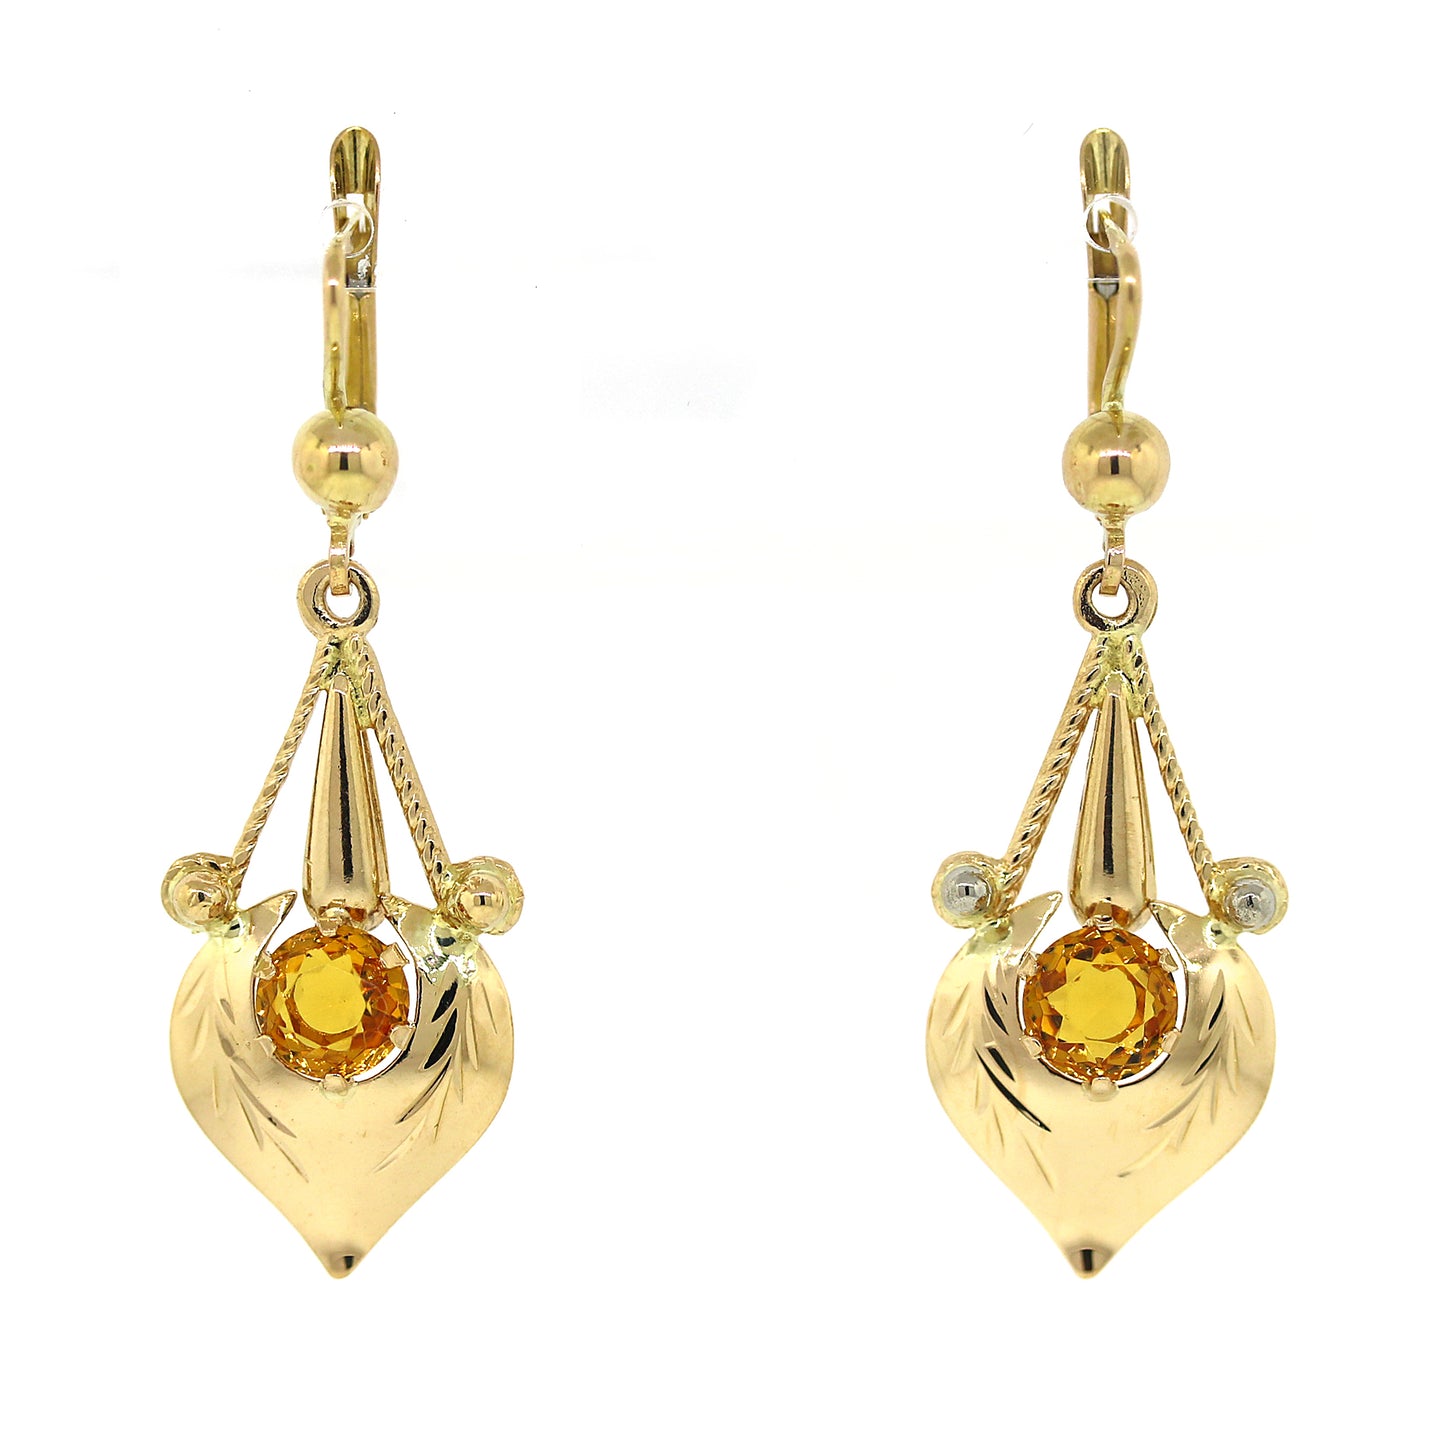 14k Gold and Citrine Hanging Earrings